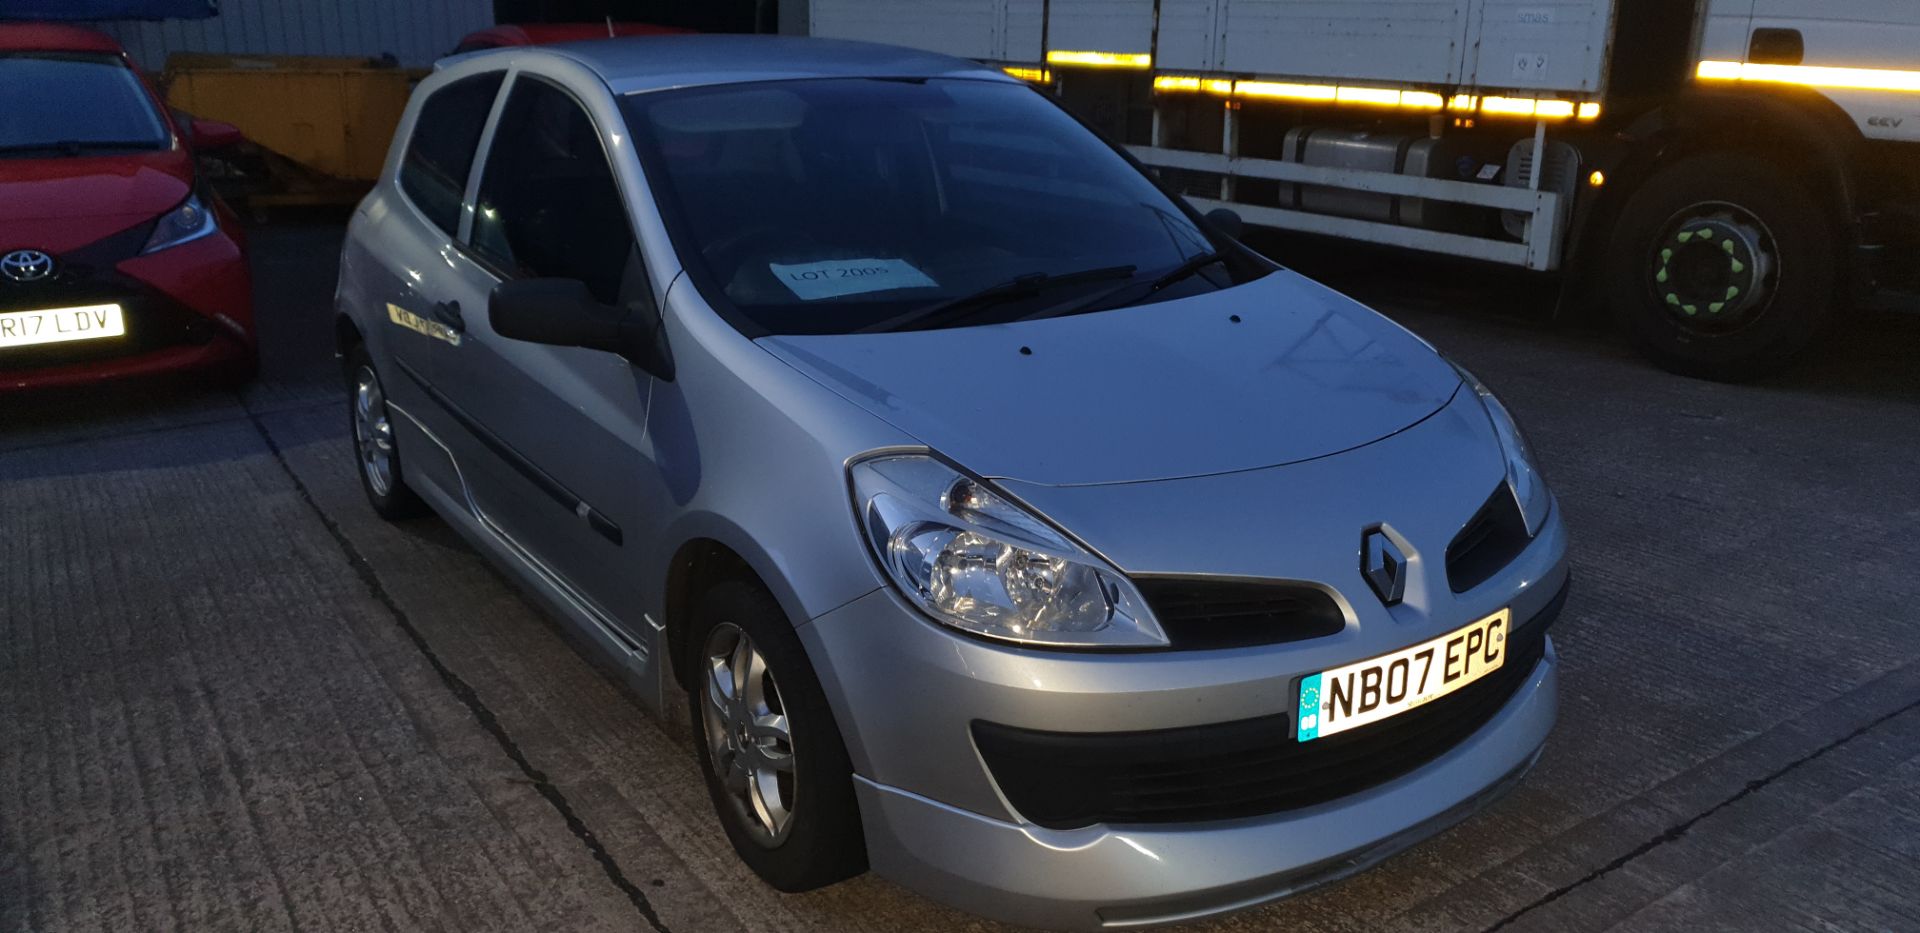 SILVER RENAULT CLIO EXTREME. Reg : NB07EPC, Mileage : 94,015 Details: KEY YES LOG BOOK YES MOT UNTIL